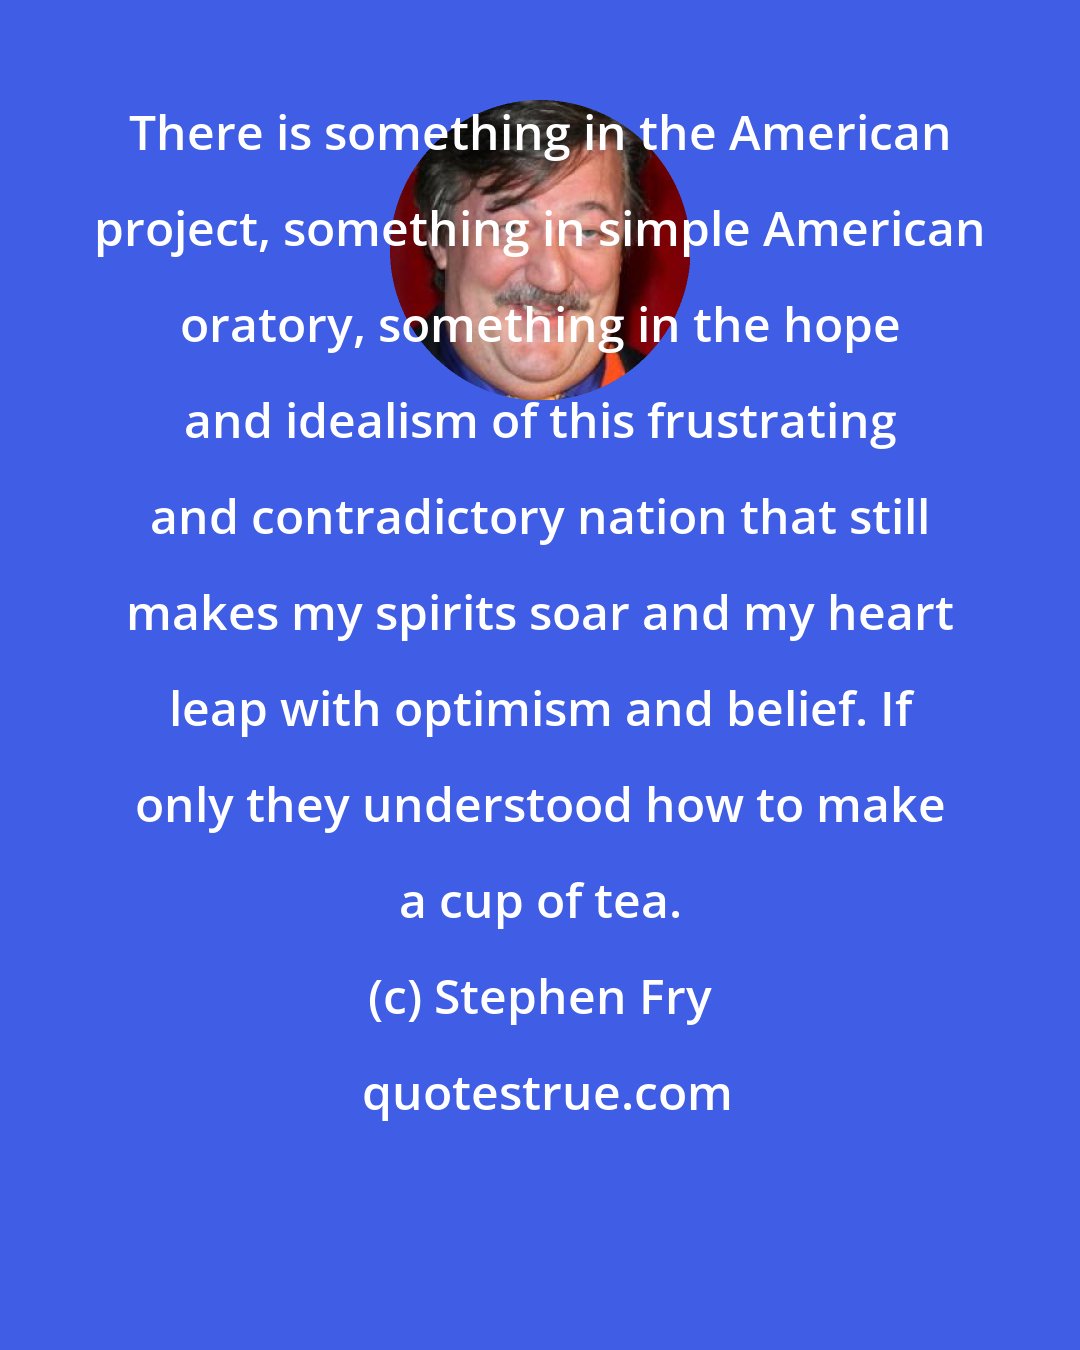 Stephen Fry: There is something in the American project, something in simple American oratory, something in the hope and idealism of this frustrating and contradictory nation that still makes my spirits soar and my heart leap with optimism and belief. If only they understood how to make a cup of tea.